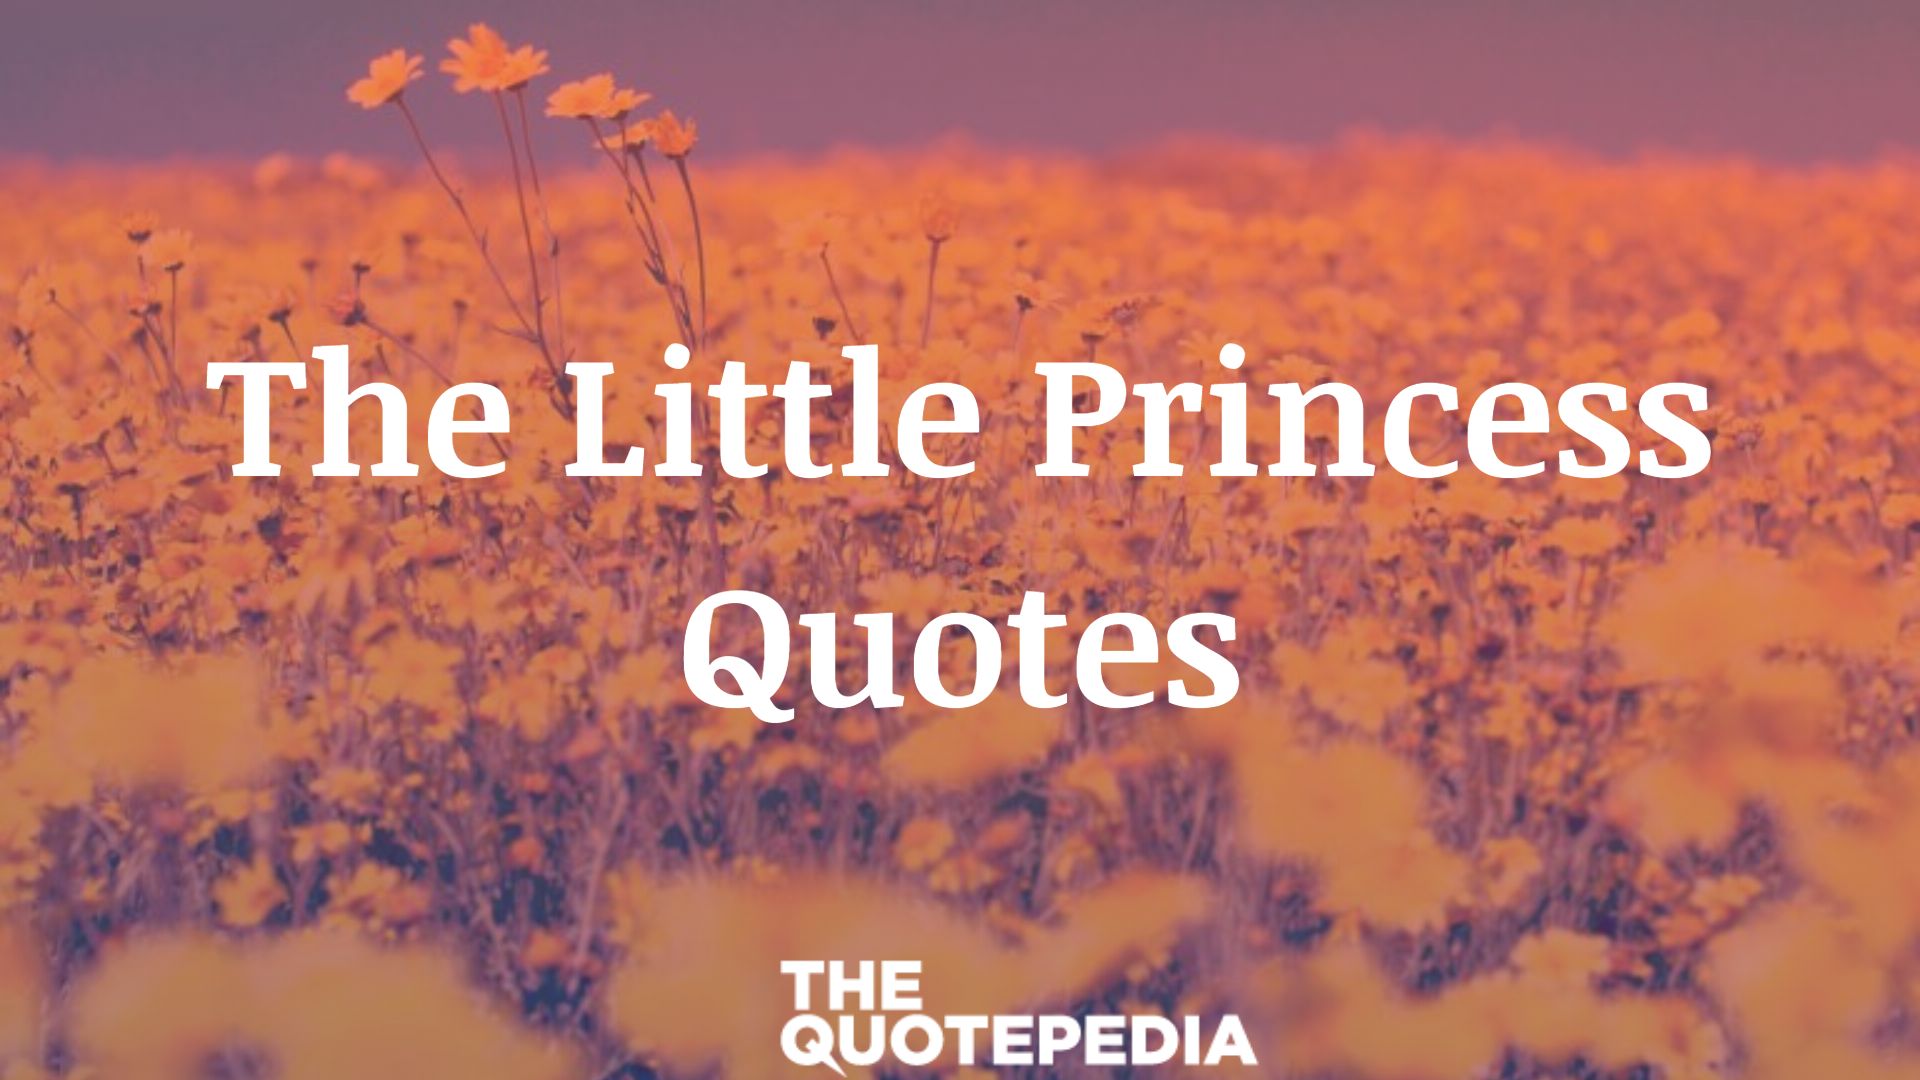 The Little Princess Quotes